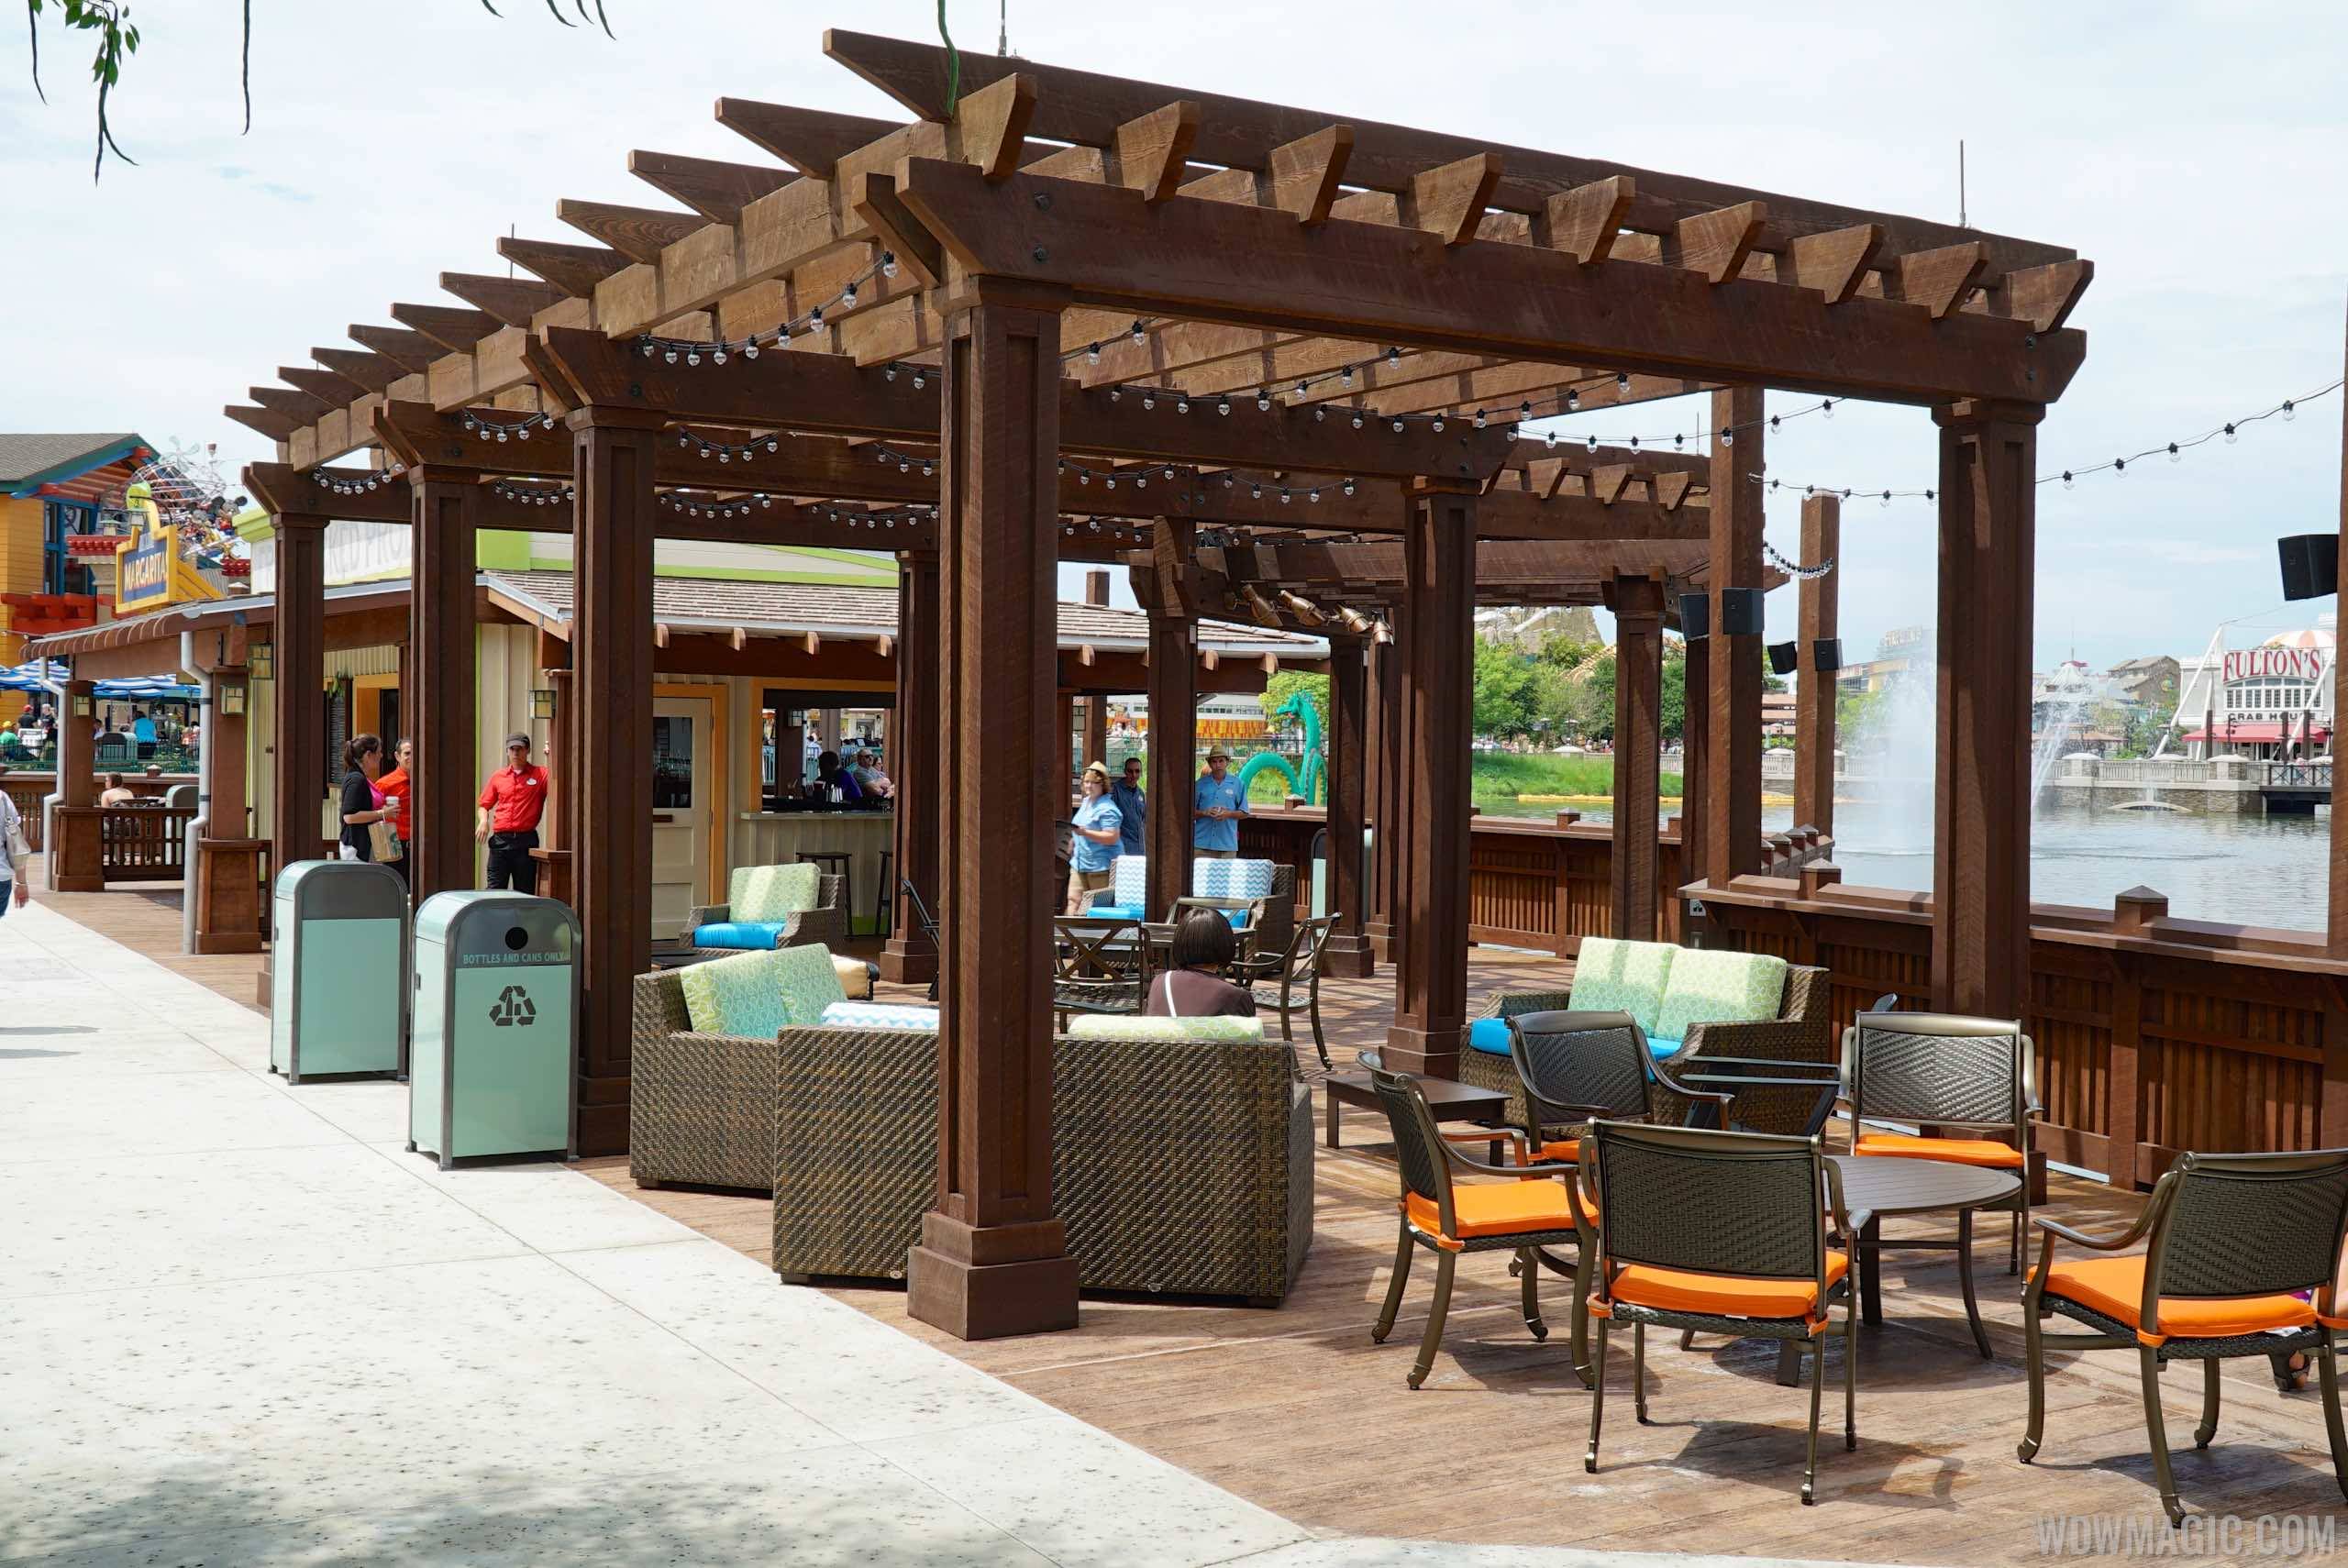 Dockside Margaritas opened in 2015 in the Marketplace